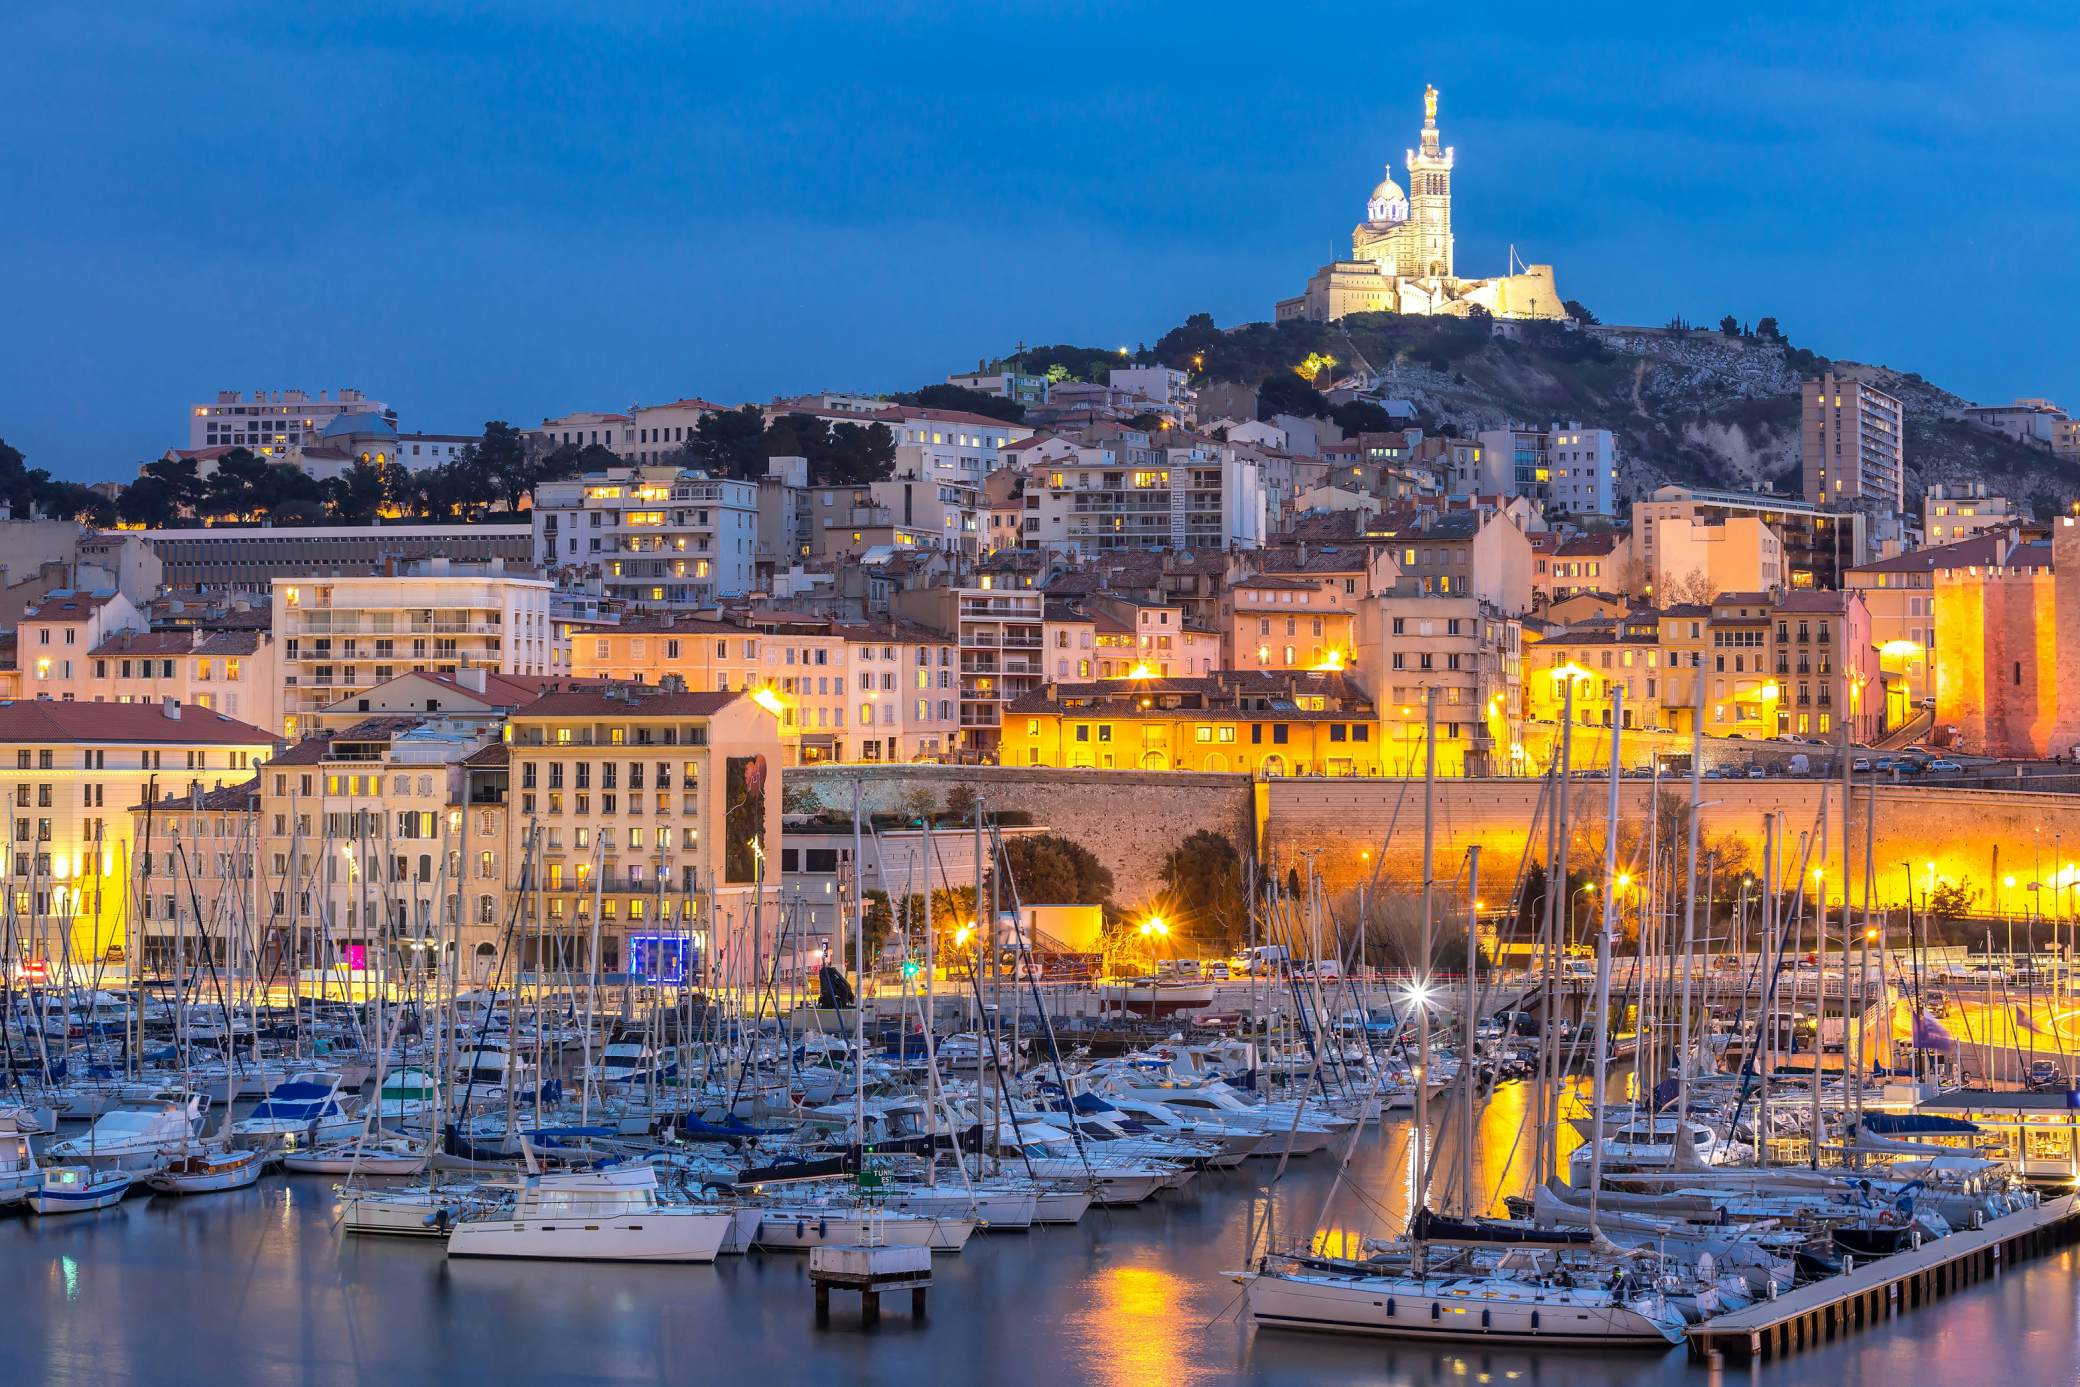 Marseille port by night. Credit to Lonely Planet